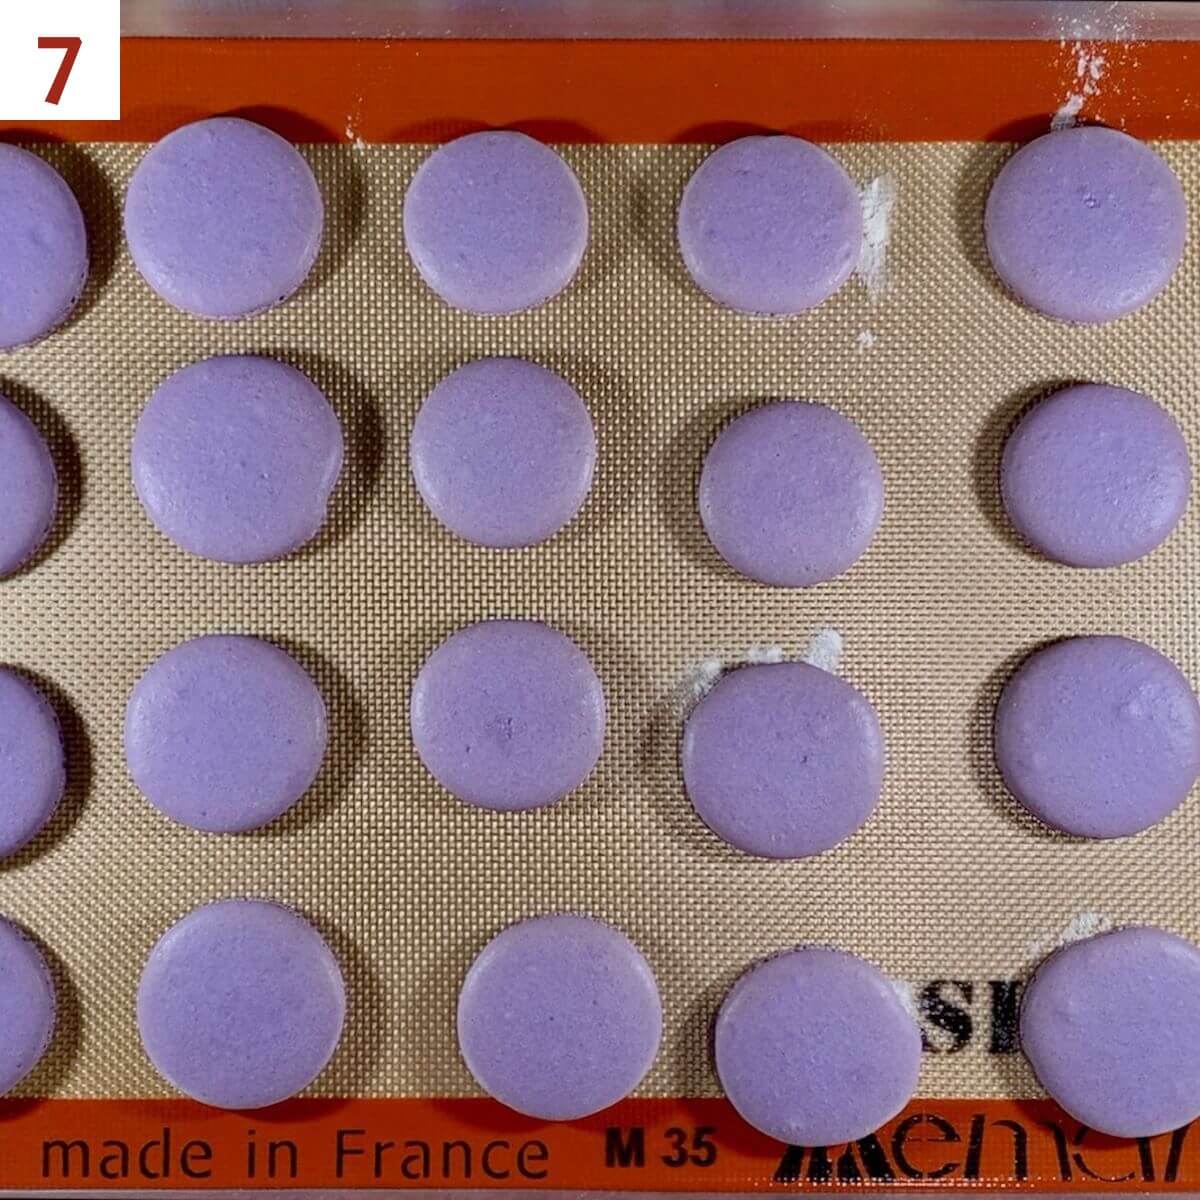 Purple french macarons on a silpat lined baking pan after baking.